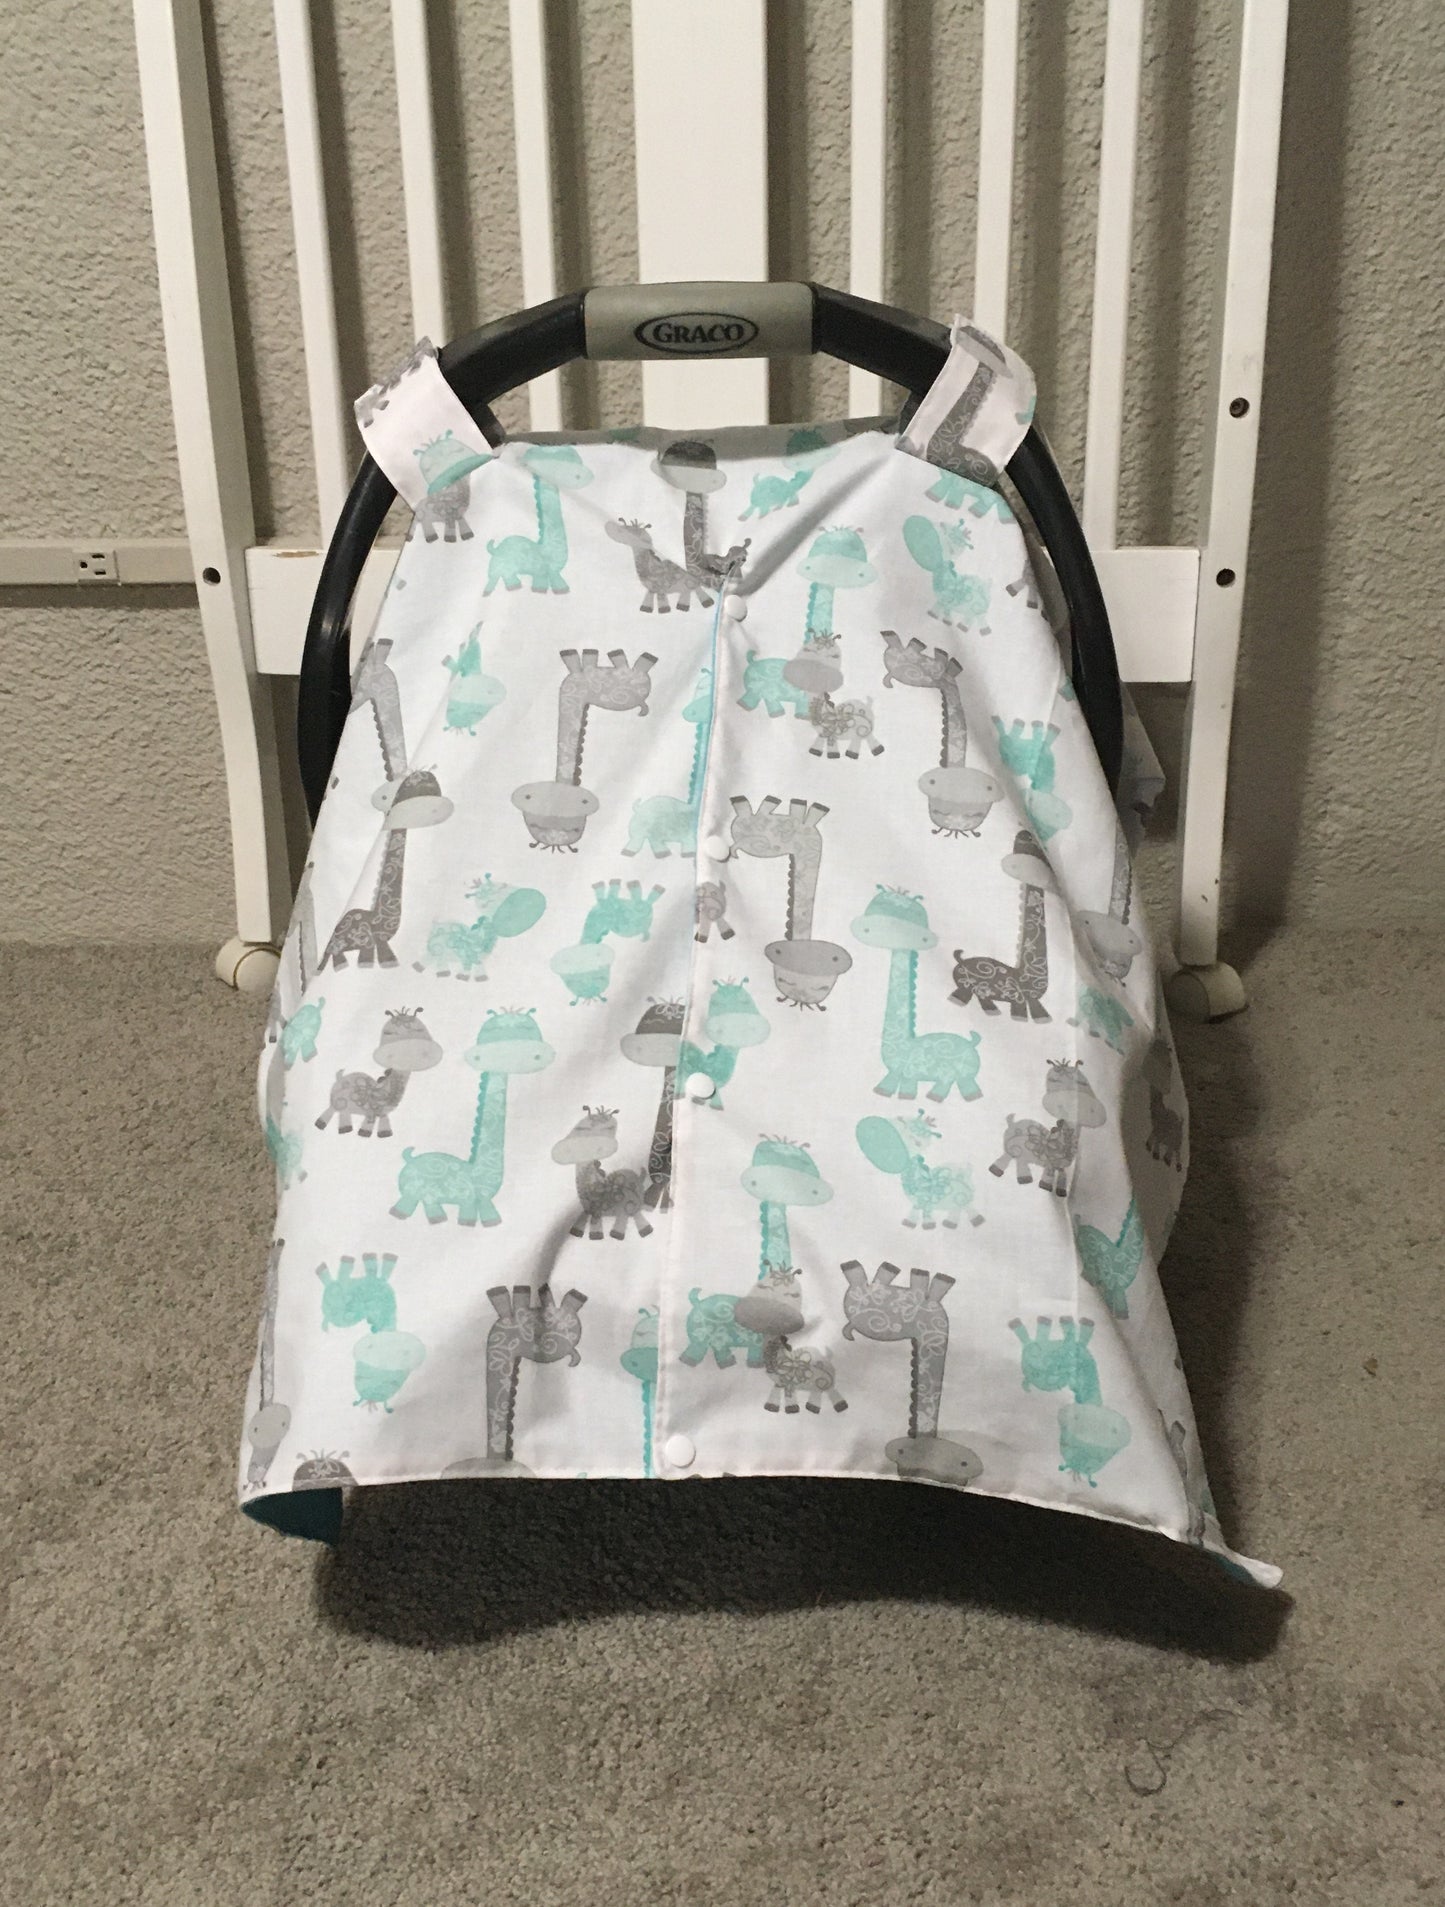 aqua & gray giraffe car seat canopy cover for infant car seat, shown in the opening option with the snaps closed